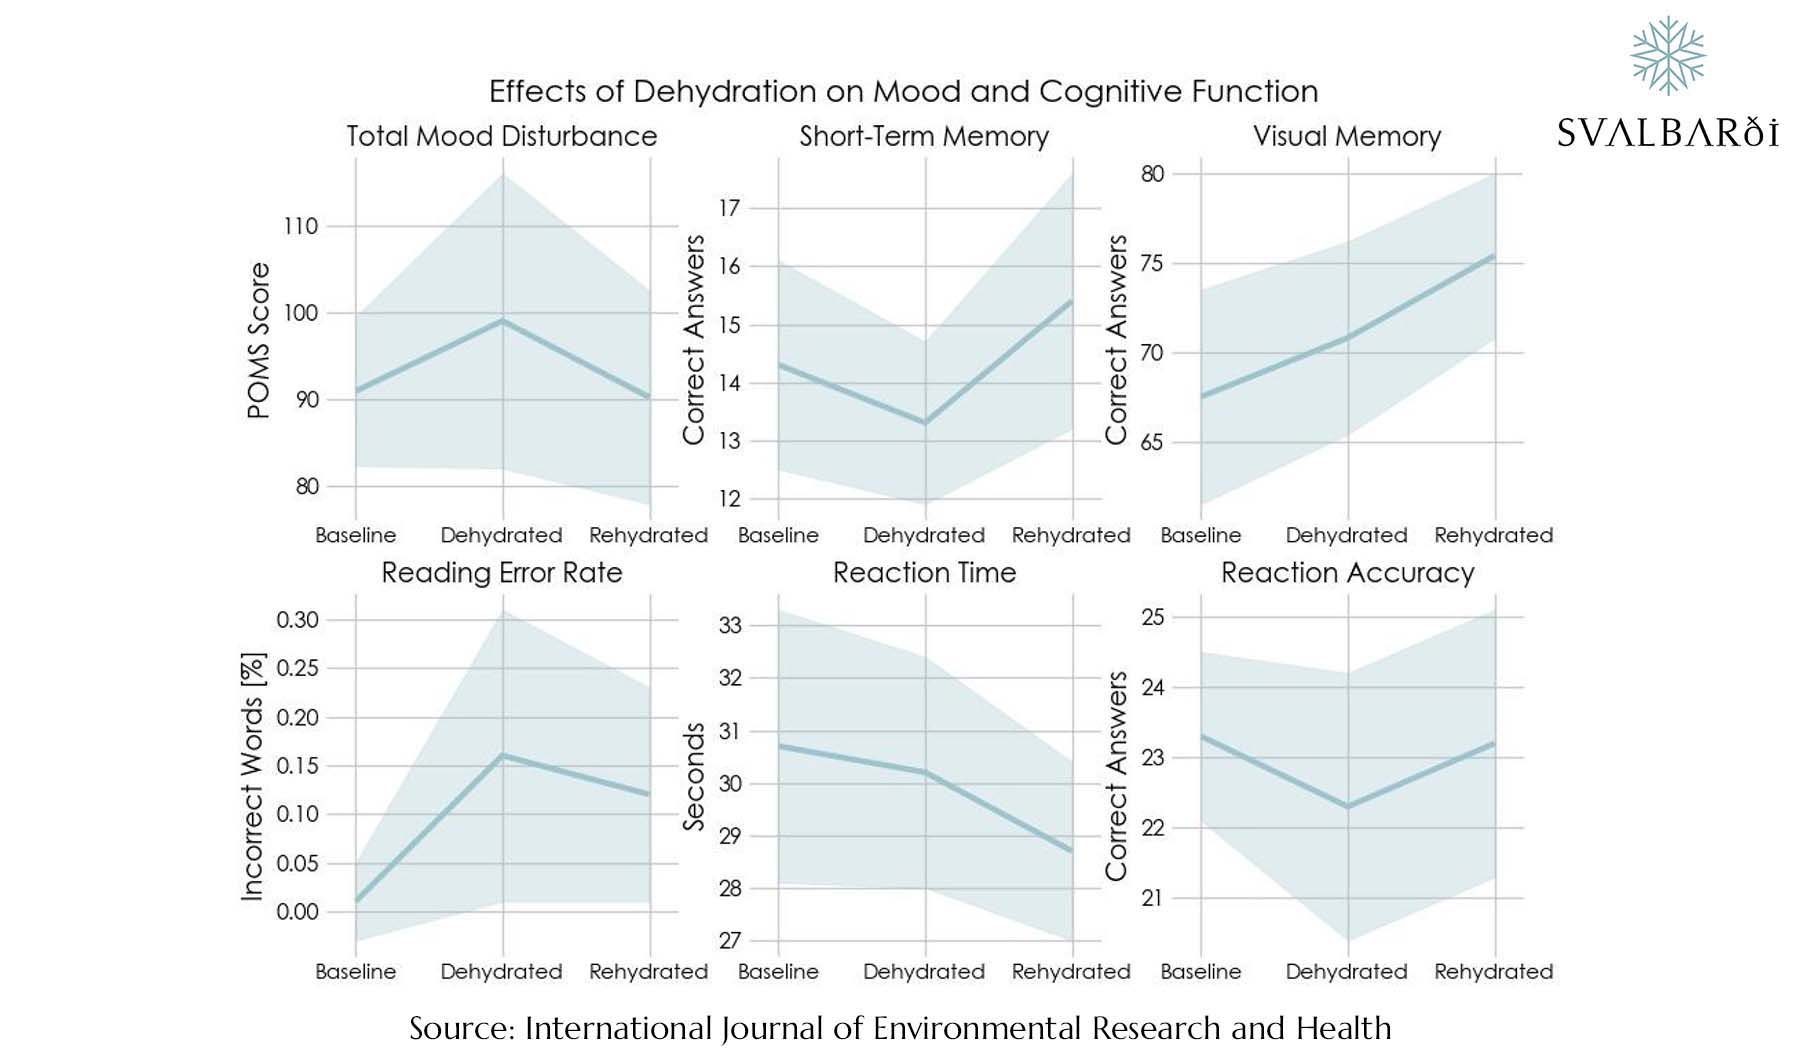 Effects of Dehydration on Cognitive Function